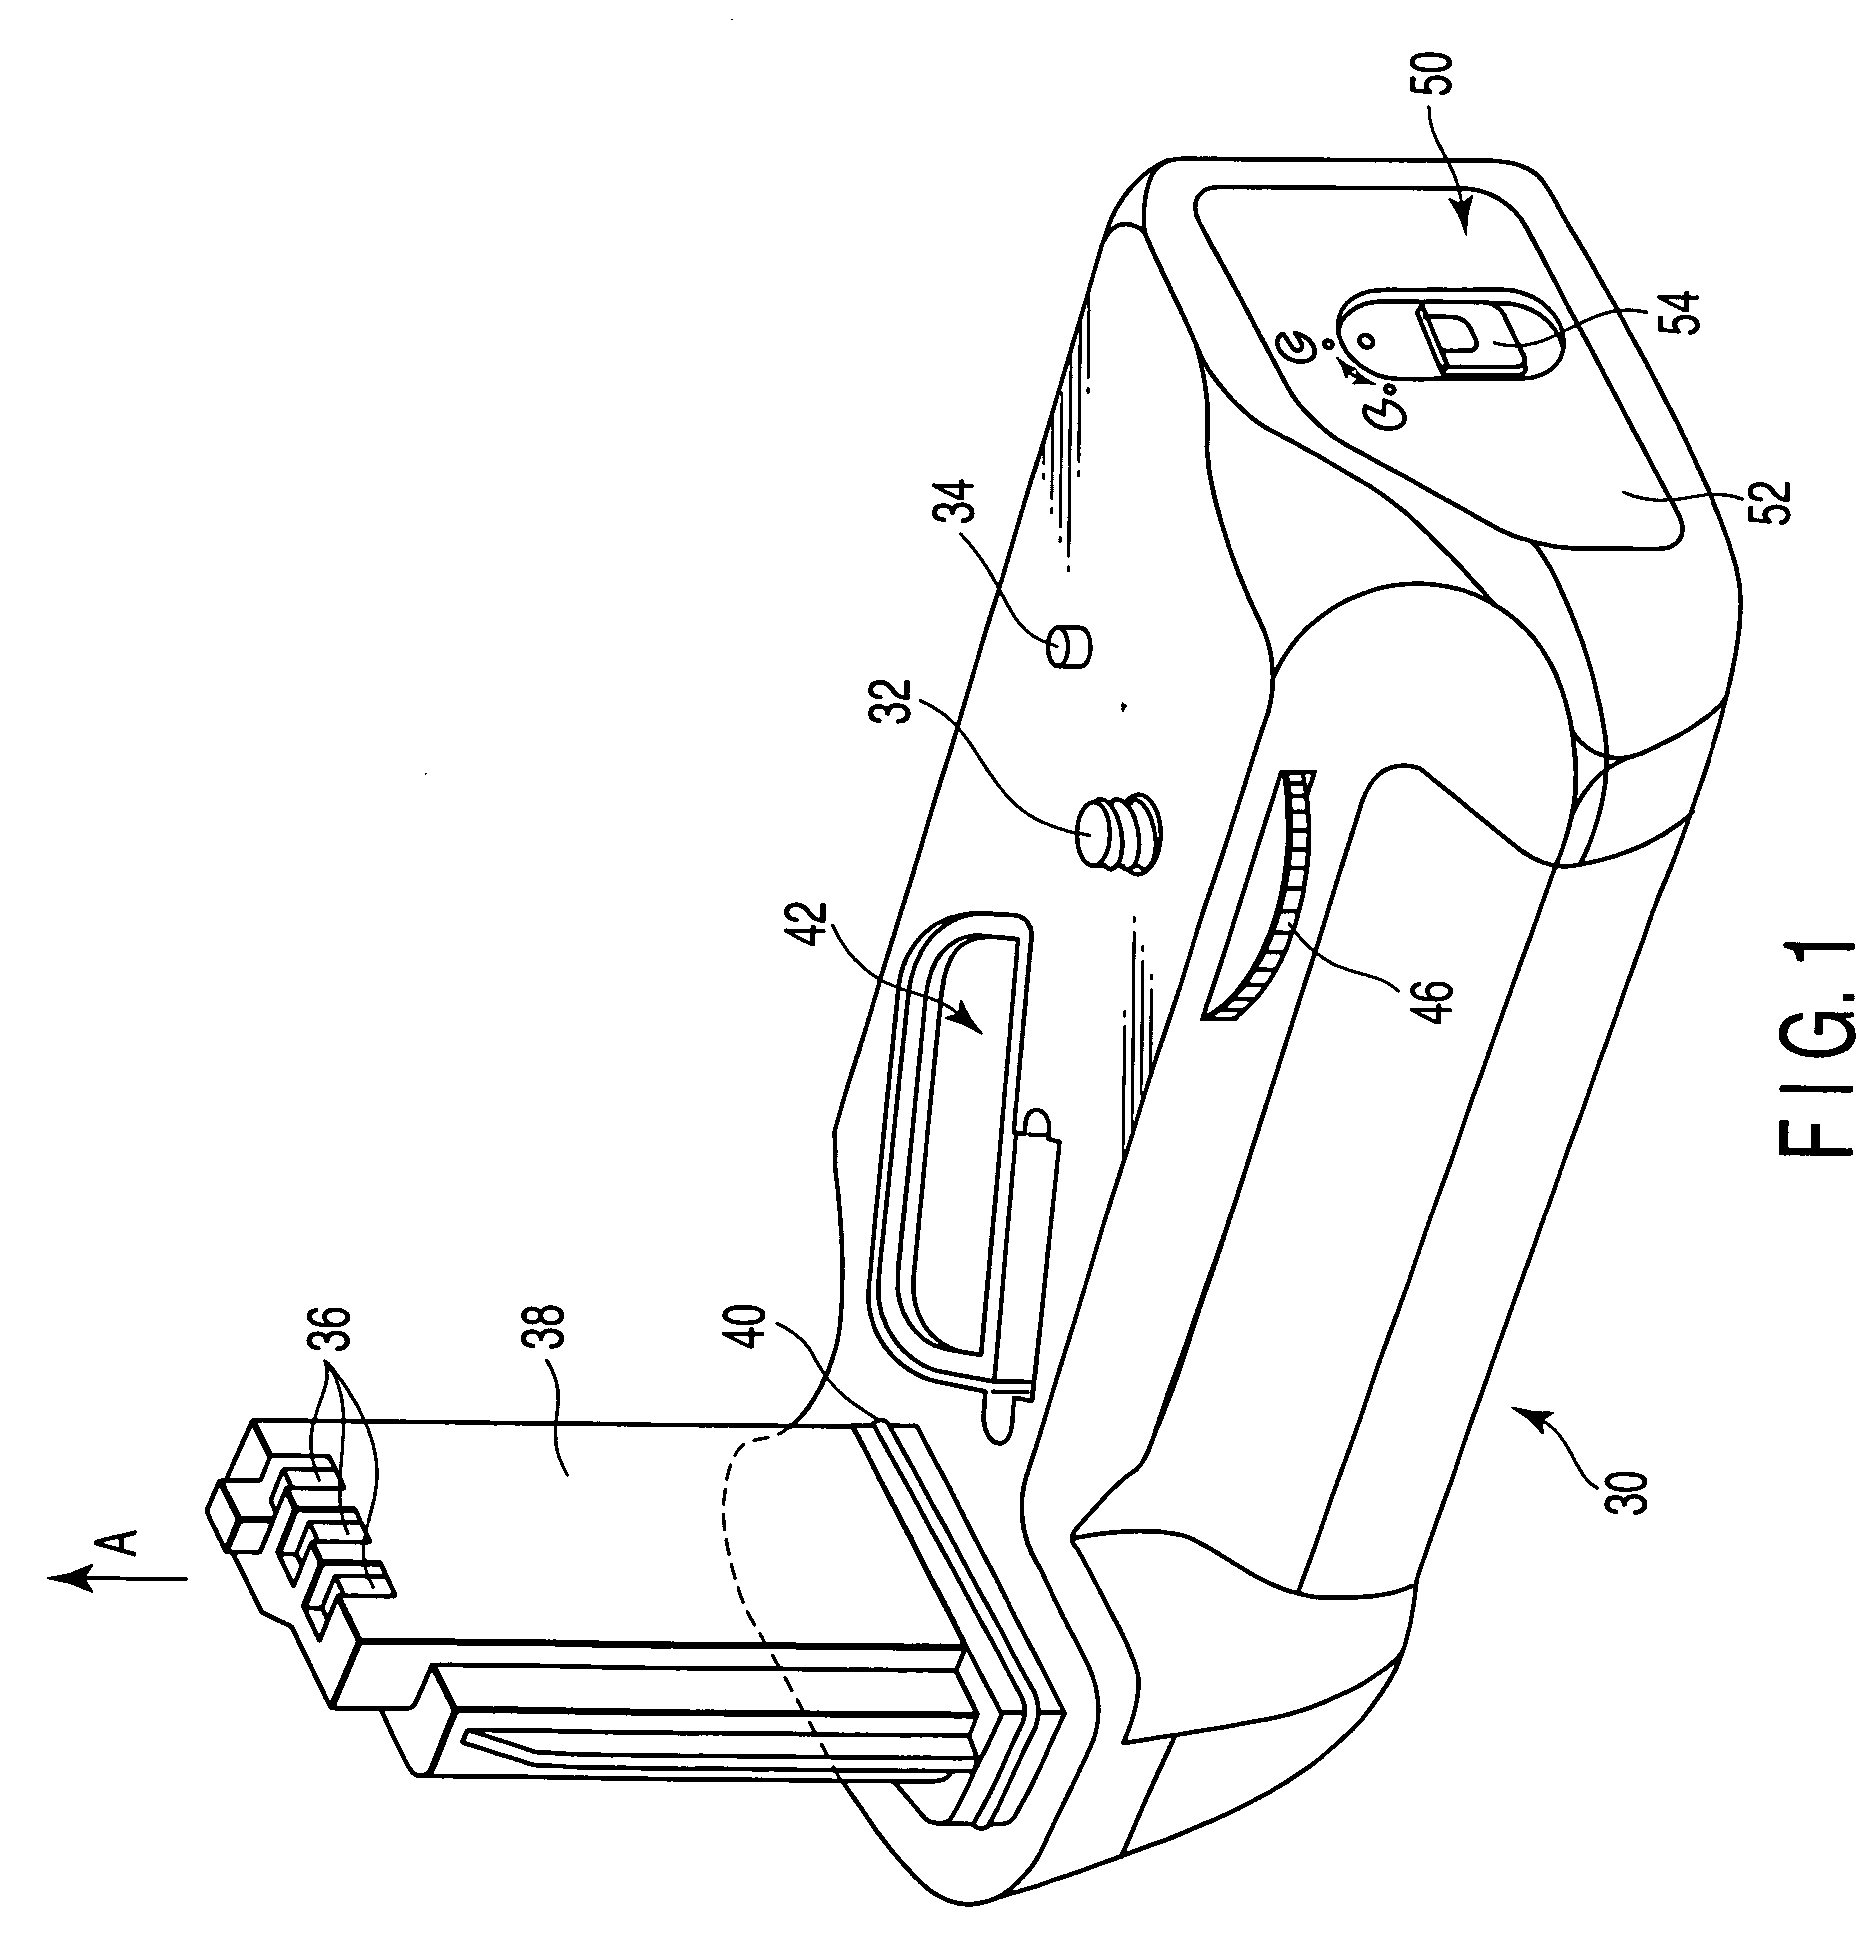 Attachment structure of adapter